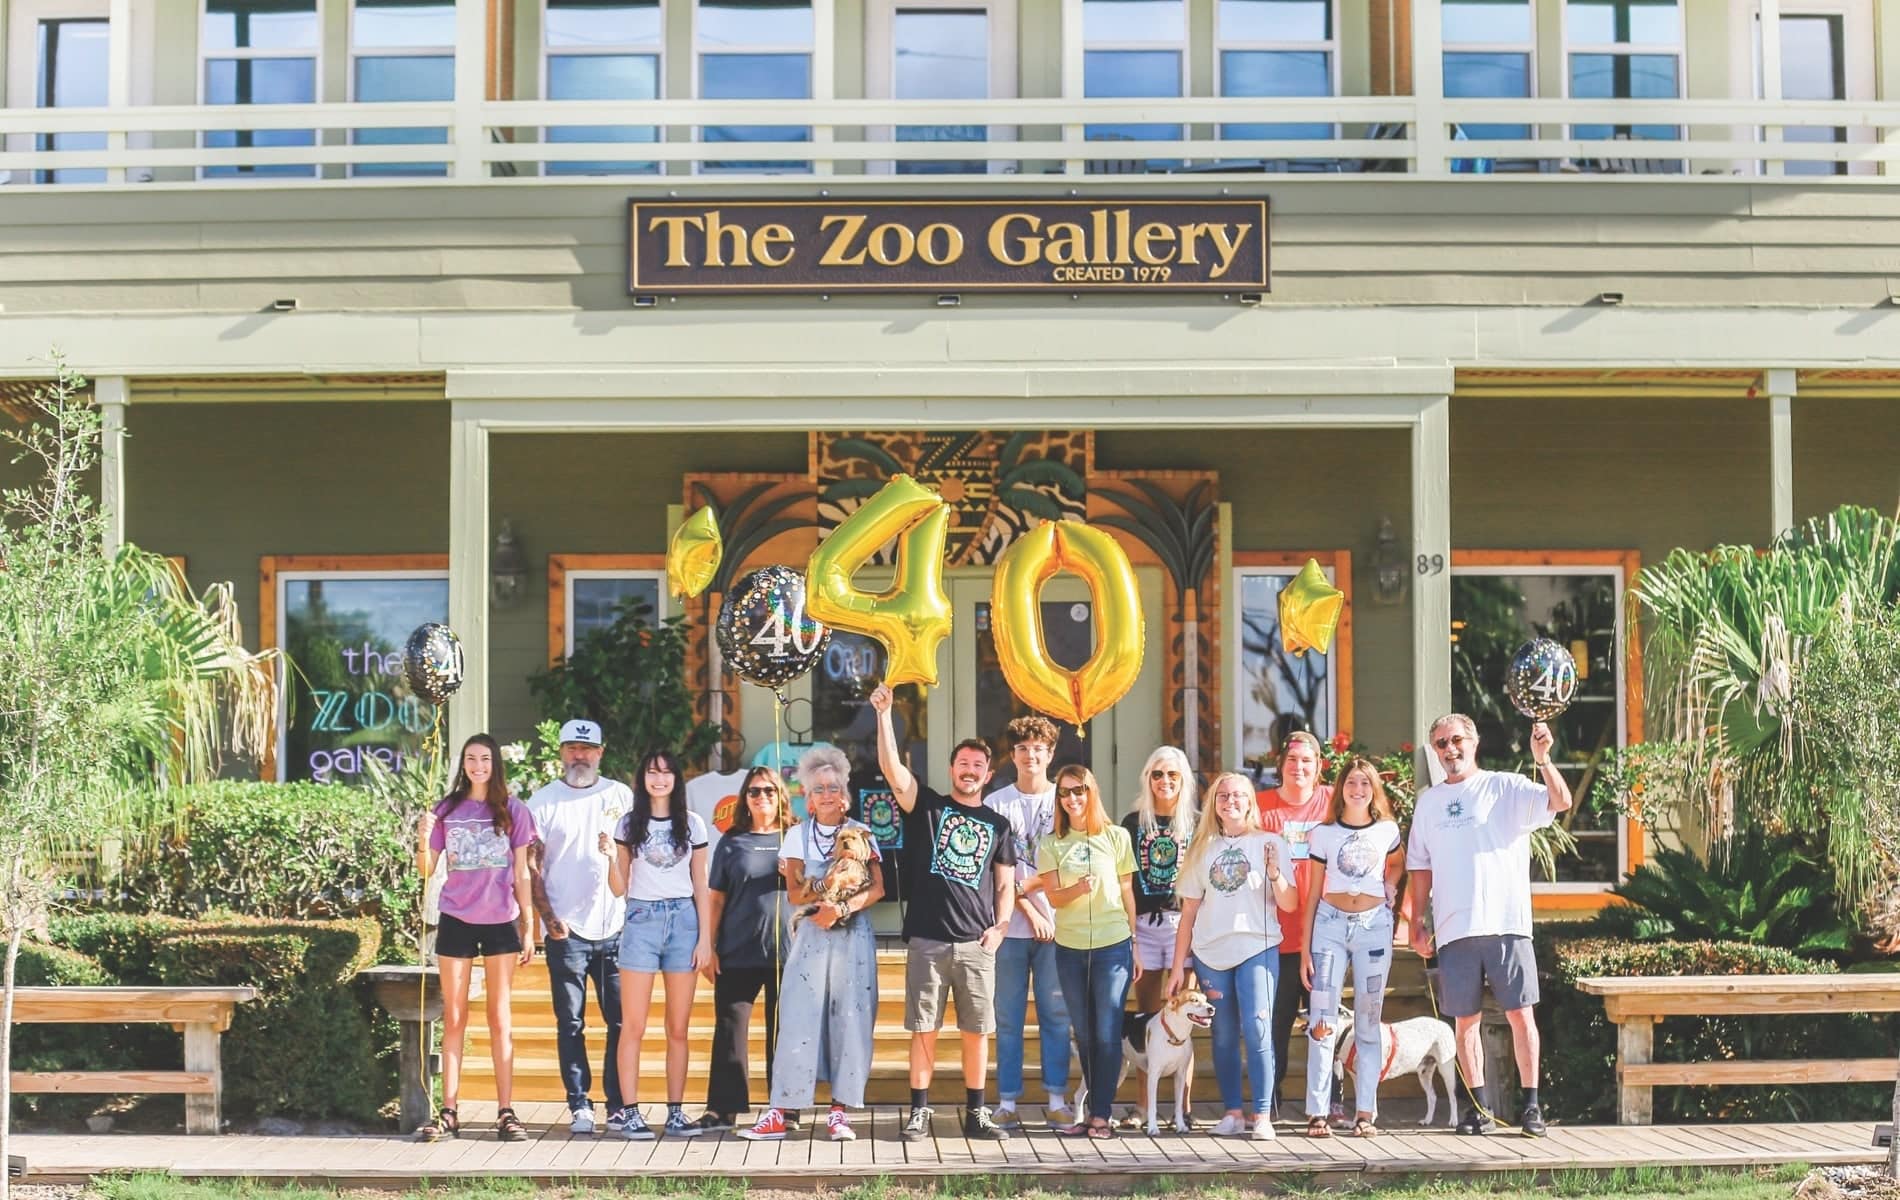 Celebrate forty years with The Zoo Gallery zookeepers! Share your Zoo T-shirt story, visit The Zoo Gallery in Grayton Beach or Grand Boulevard, and get news updates by following them on social media.